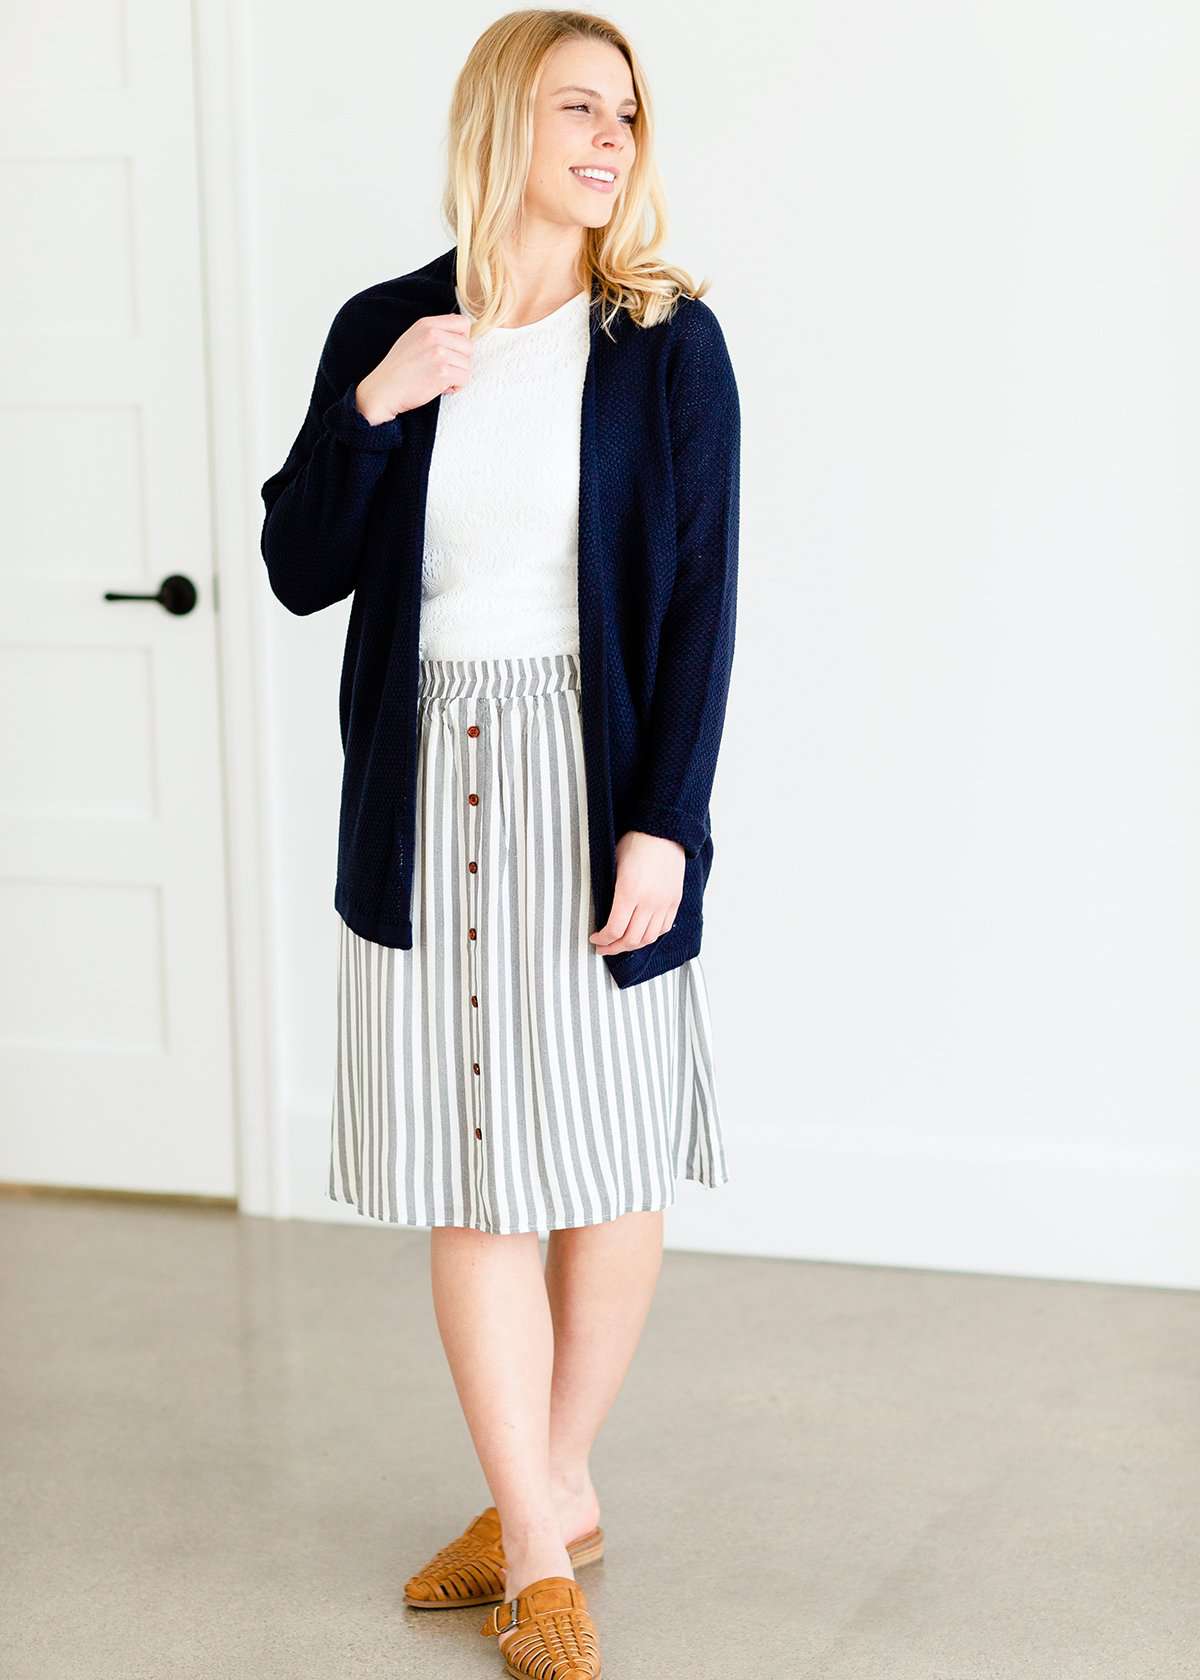 Woman wearing a gray striped skirt with camel colored faux buttons on the front that also has an elastic waistband